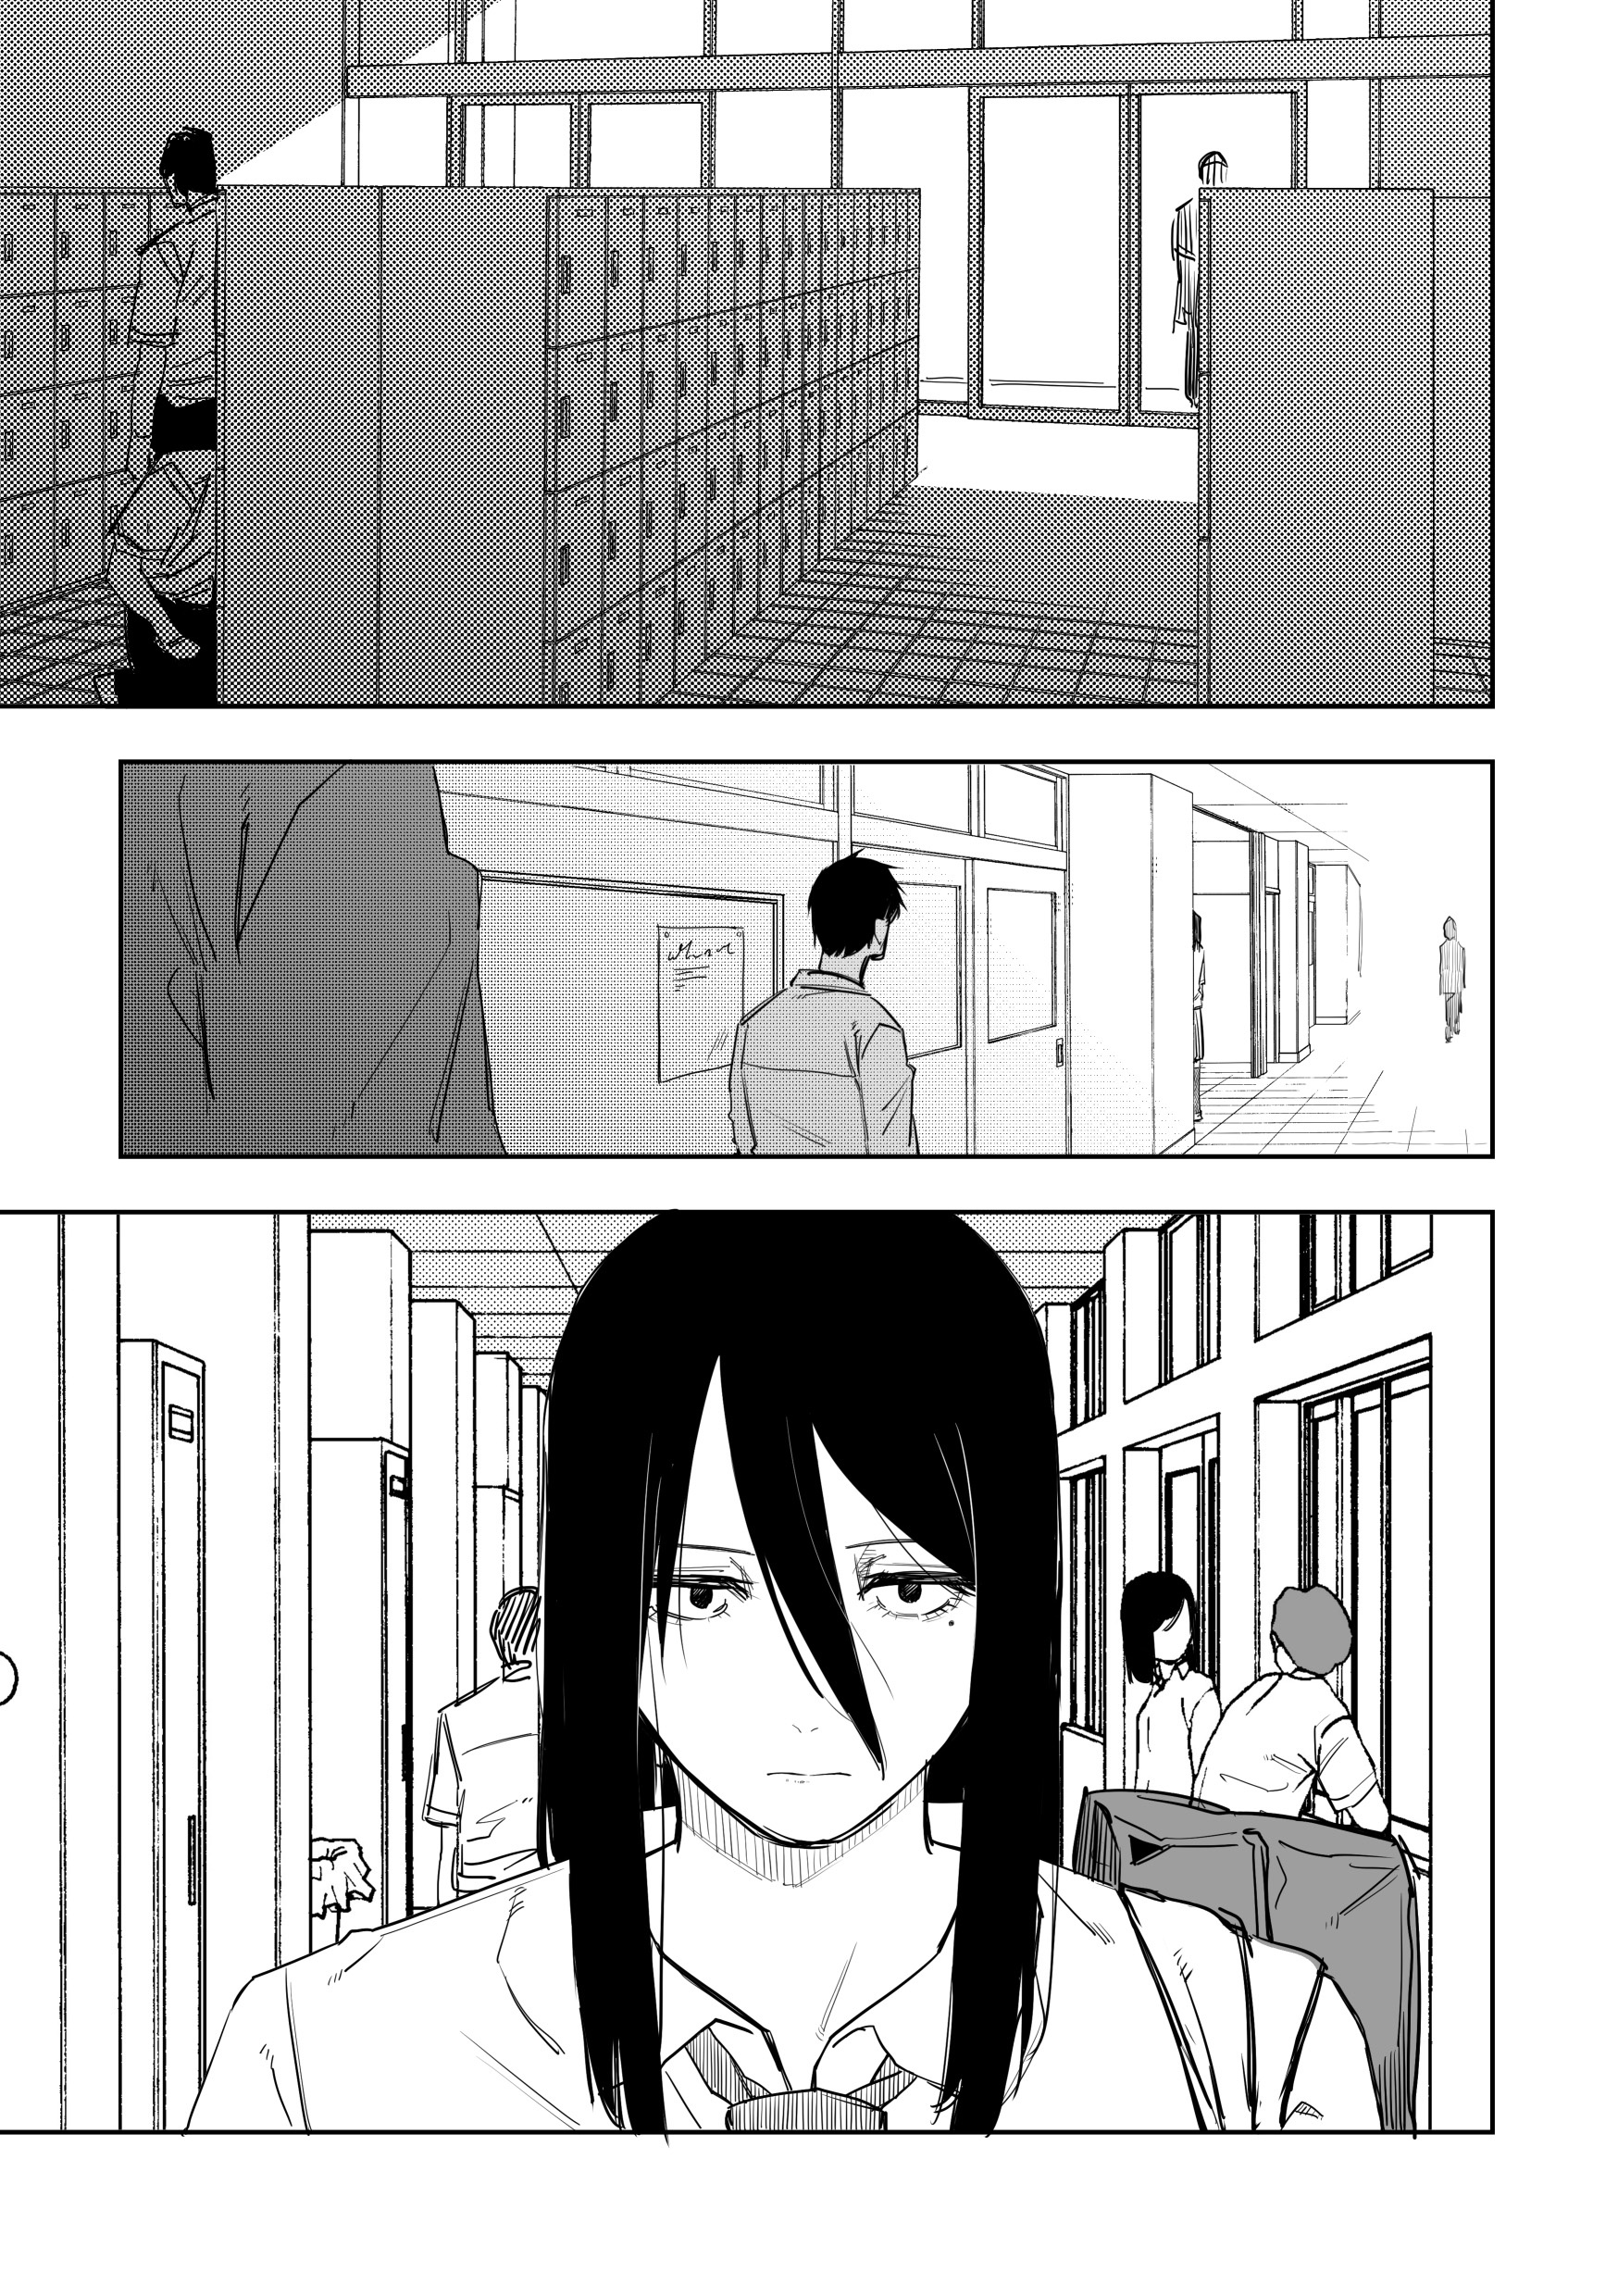 A Cute Girl With Bad Eyesight Vol.1 Chapter 30